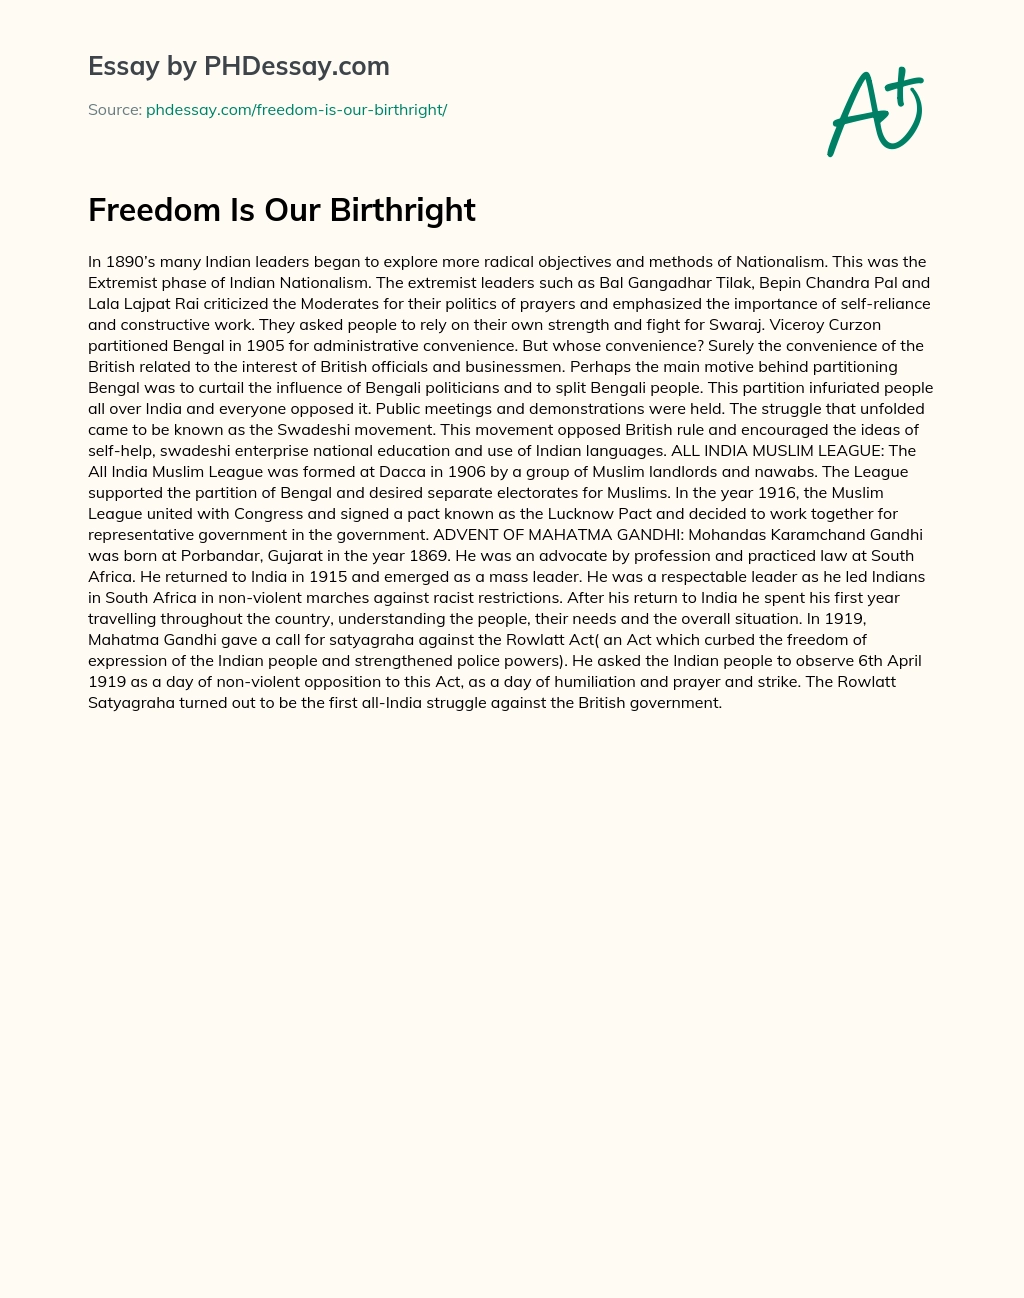 essay on freedom is our birthright